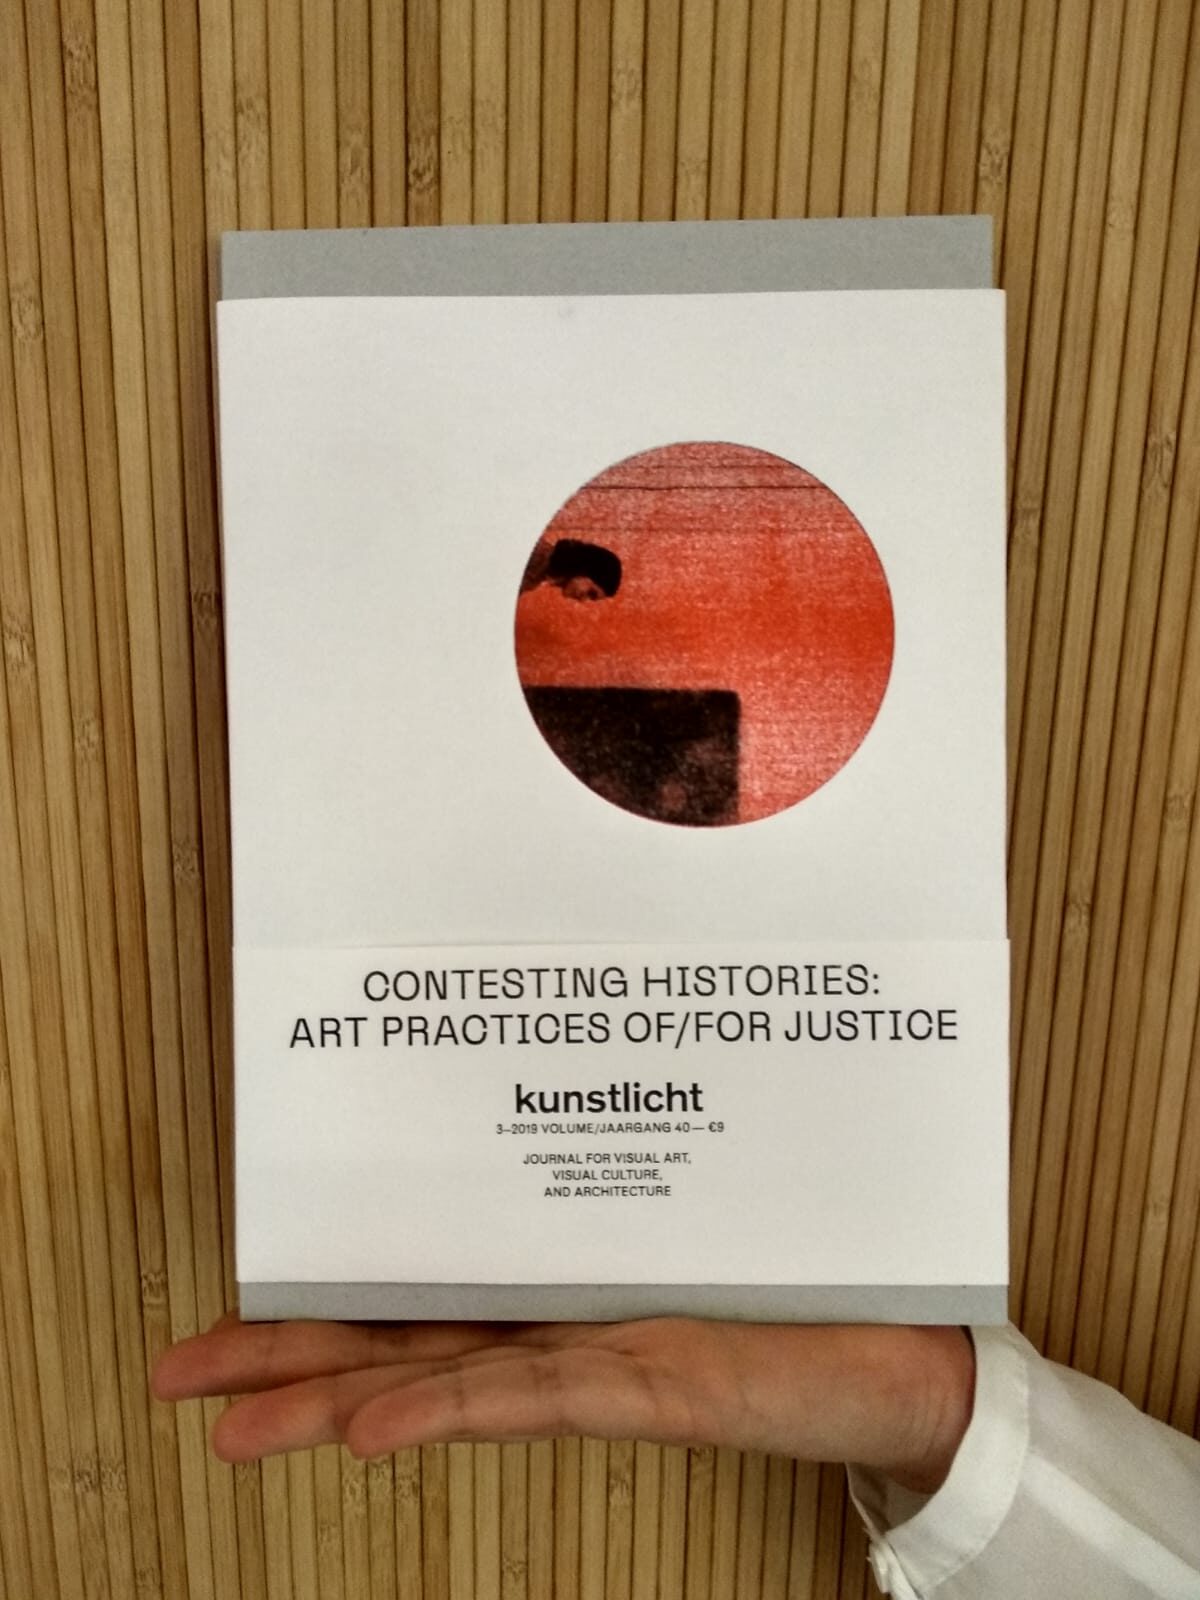 VOL. 40 NO. 3, 2019, CONTESTING HISTORIES: ART PRACTICES OF/FOR JUSTICE